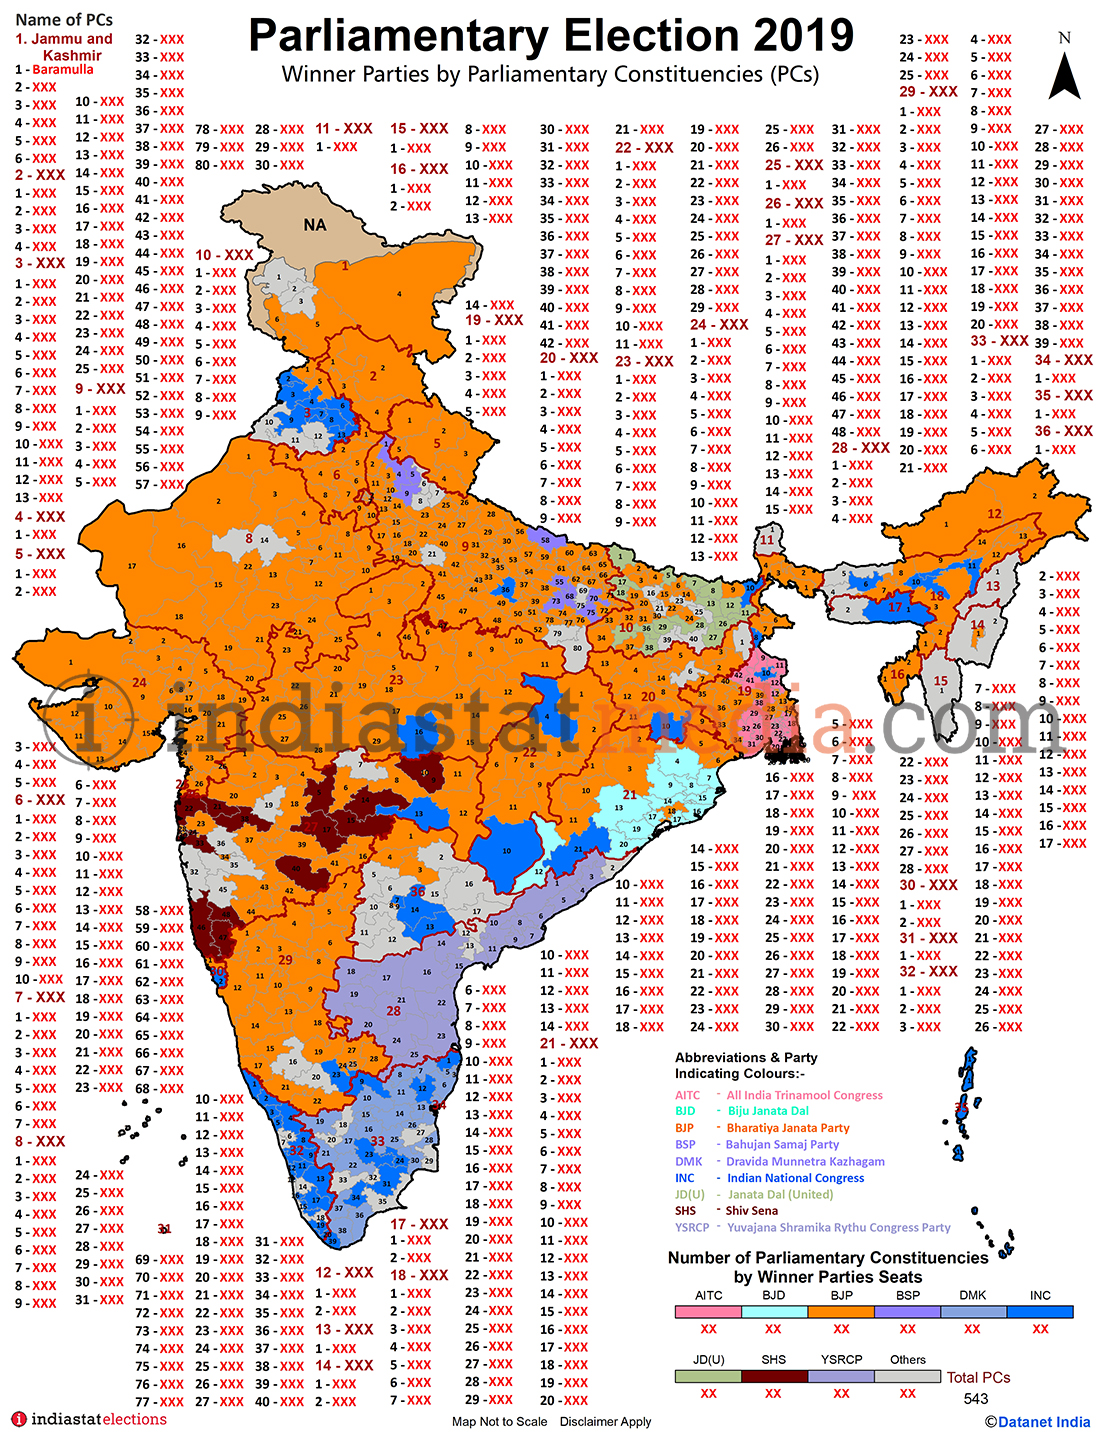 Winner Parties by Parliamentary Constituencies in India (Parliamentary Election - 2019)